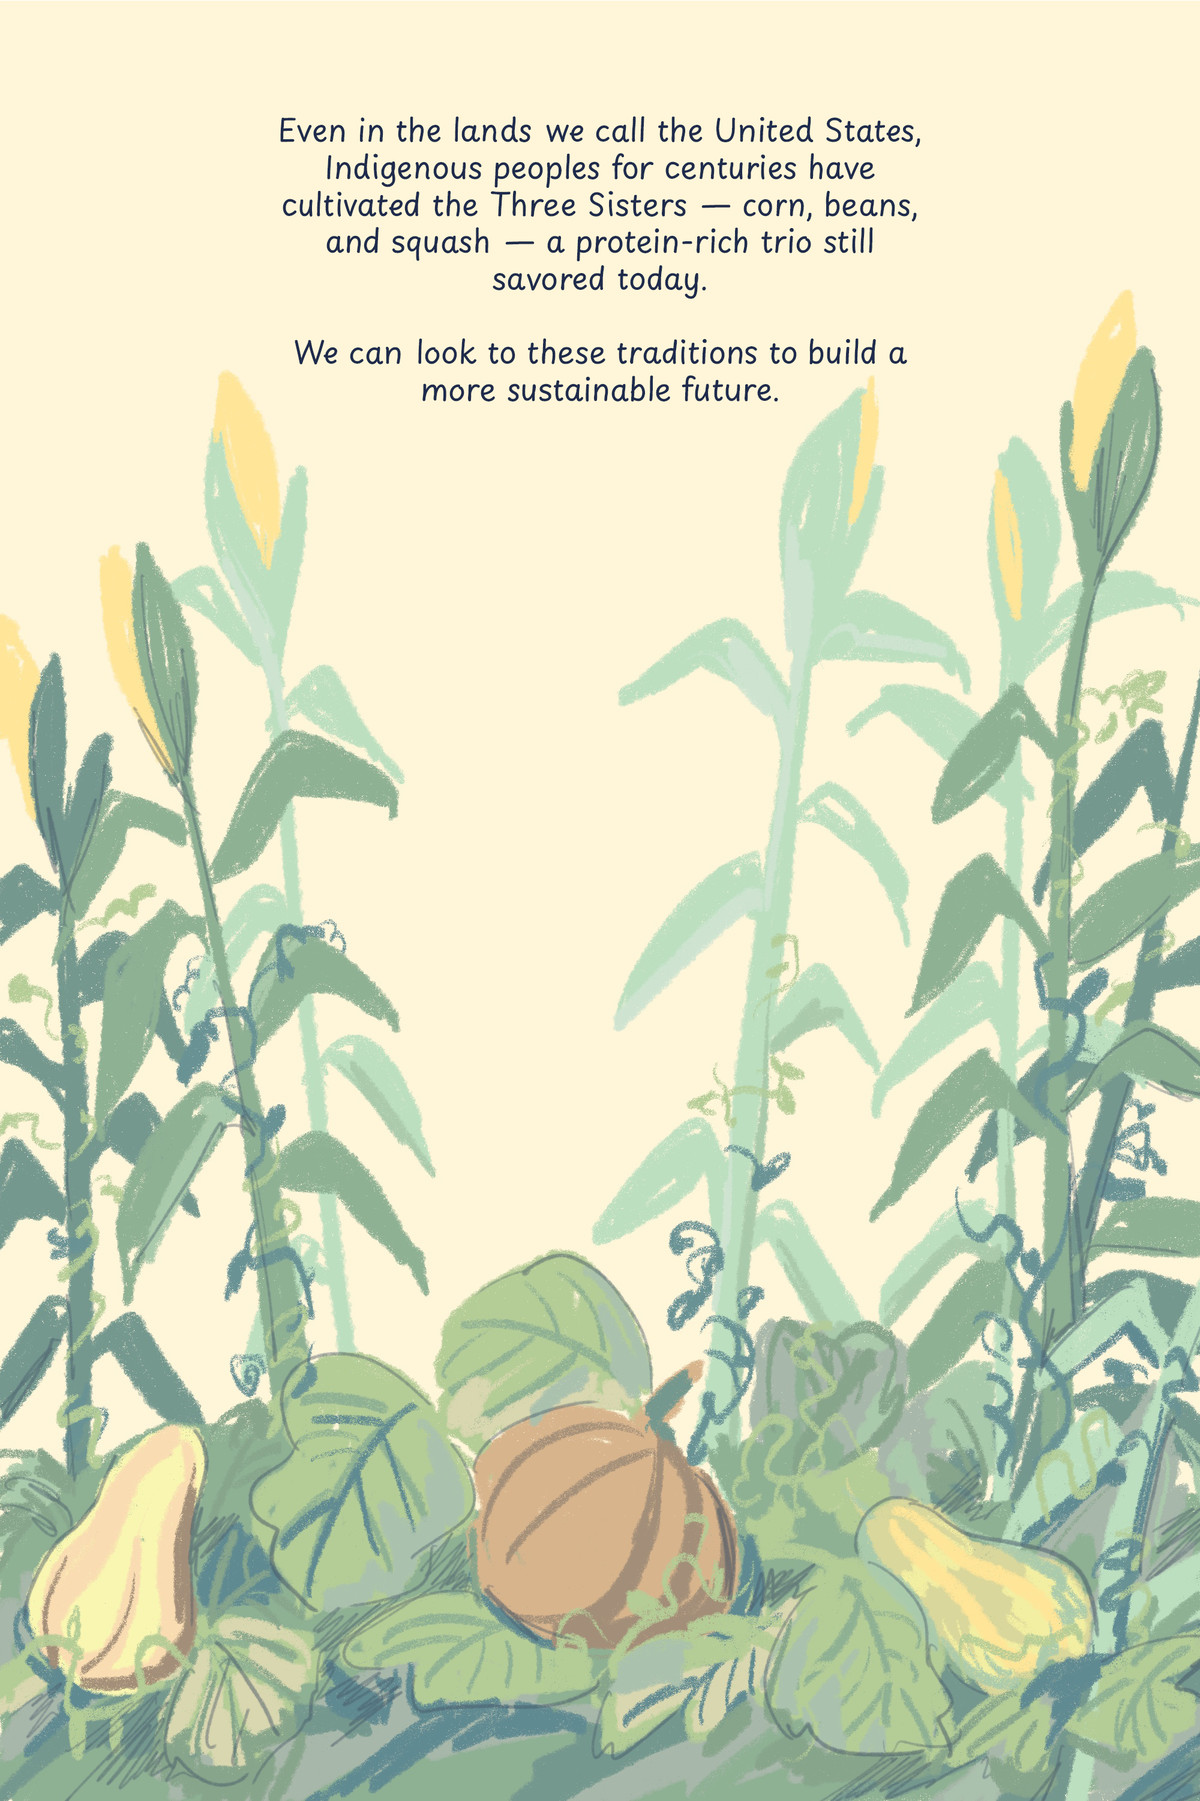 Text reads: “Even in the lands we call the United States, Indigenous peoples for centuries cultivated the Three Sisters — corn, beans, and squash — a protein-rich trio still savored today.&nbsp;We can look to these traditions to build a more sustainable future.” These words are superimposed on an illustration of the Three Sisters growing in a field against a soft yellow sky.